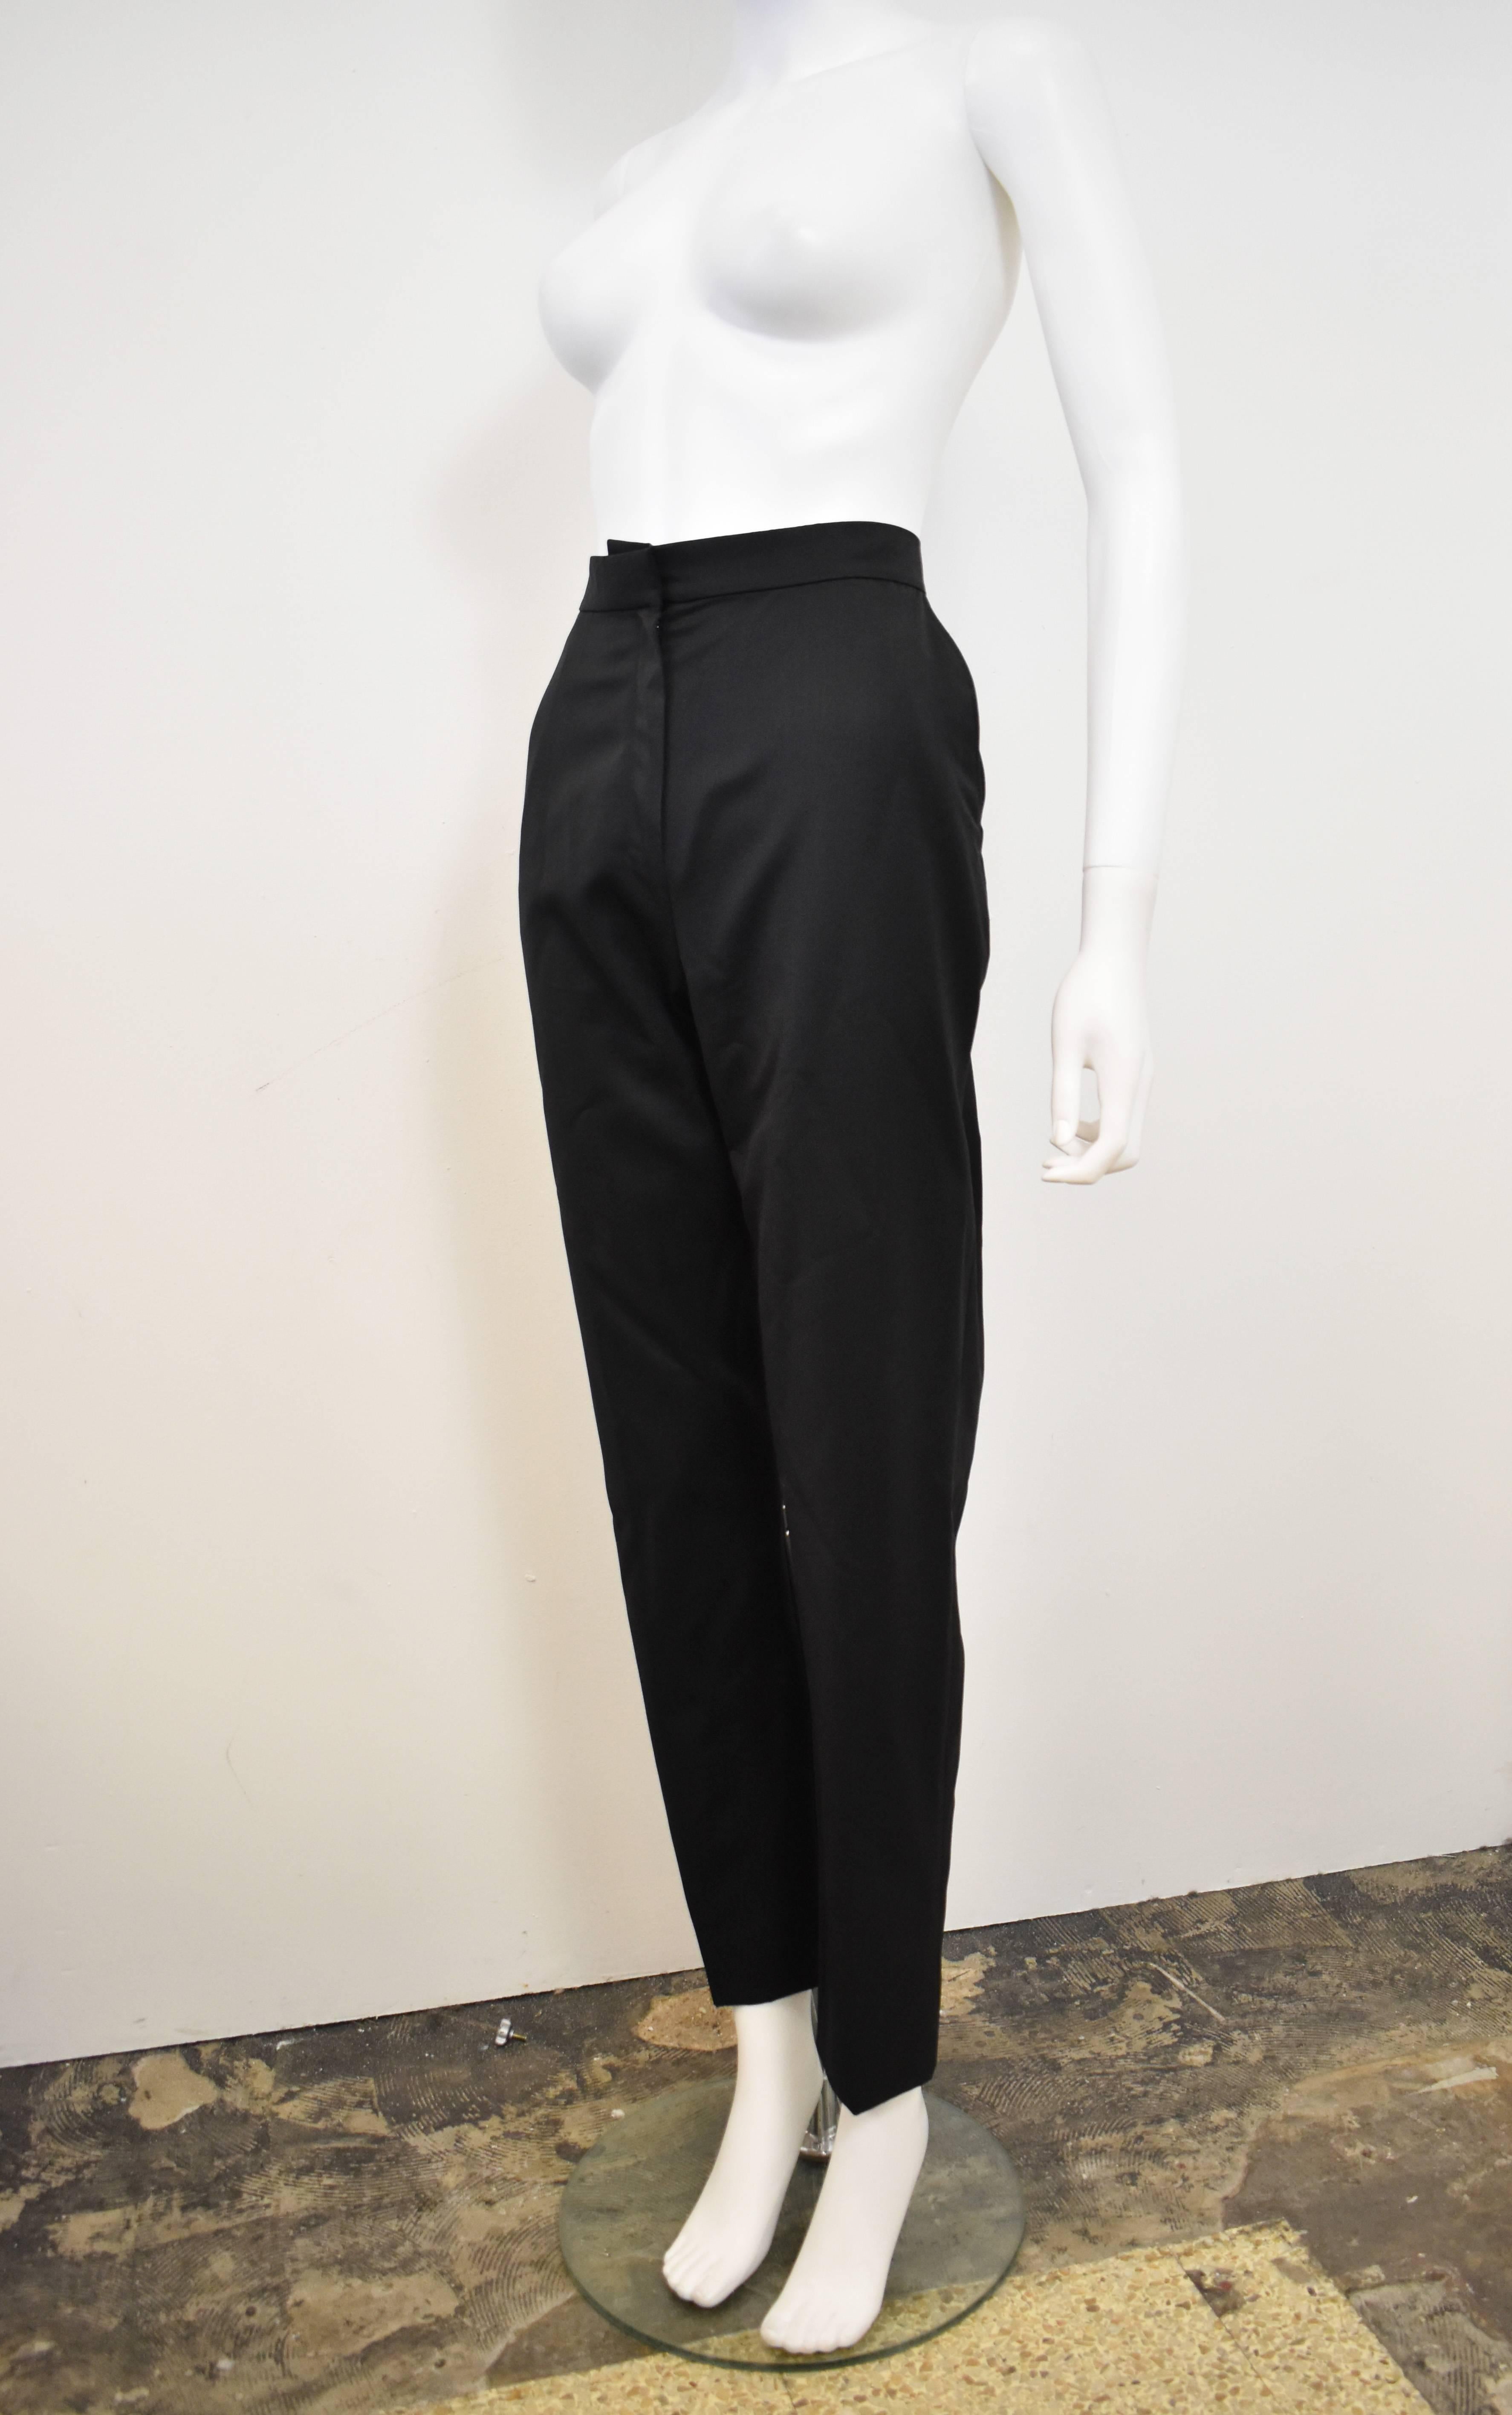 A pair of classic, vintage Yves Saint Laurent Rive Gauche Black Tuxedo Trousers. They have a wonderful Cigarette Pant shape with high-waist, slim fit and tapered legs that gets smaller toward the ankle creating an iconic YSL androgynous,